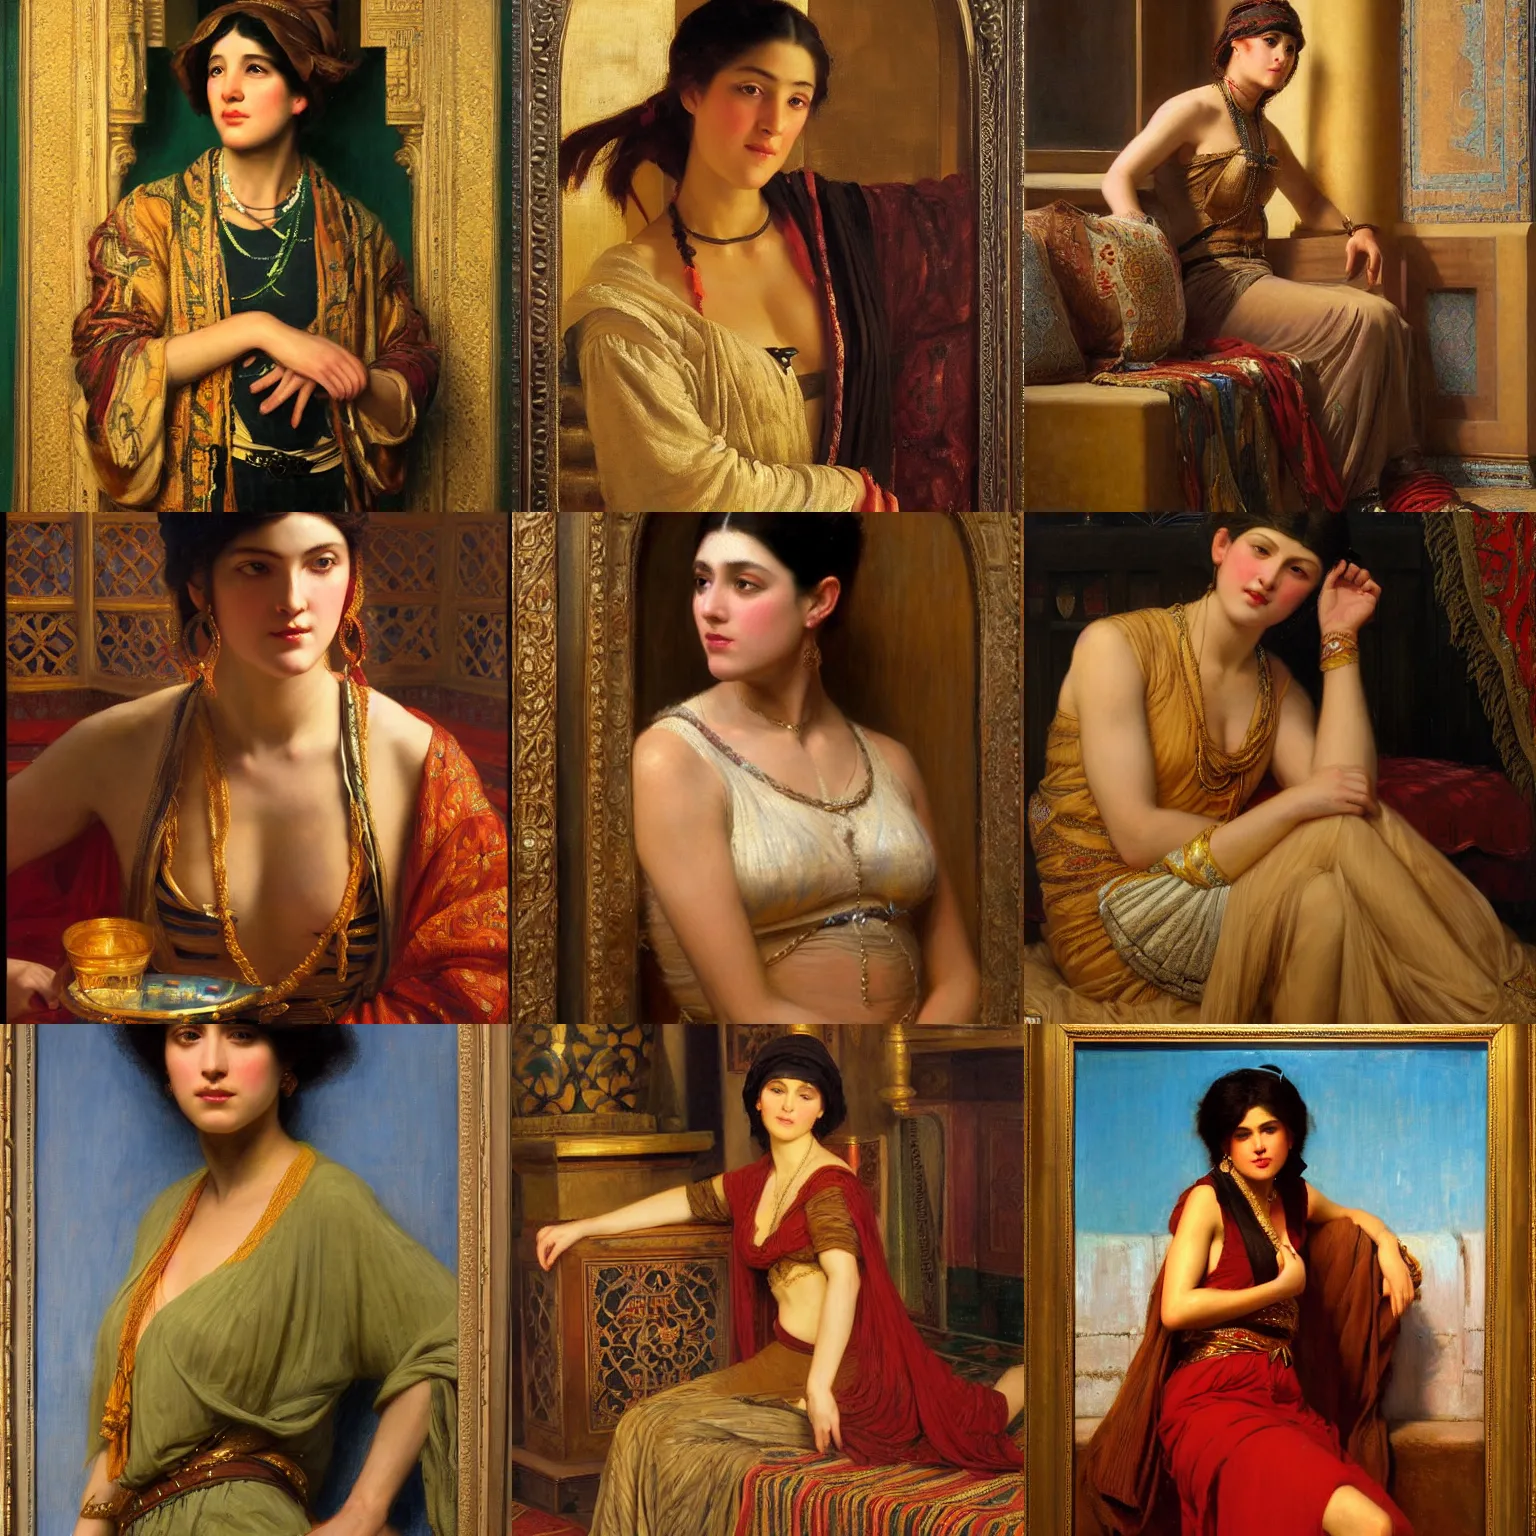 Prompt: orientalism painting female scoundrel by edwin longsden long and theodore ralli and nasreddine dinet and adam styka, masterful intricate art. oil on canvas, excellent lighting, high detail 8 k